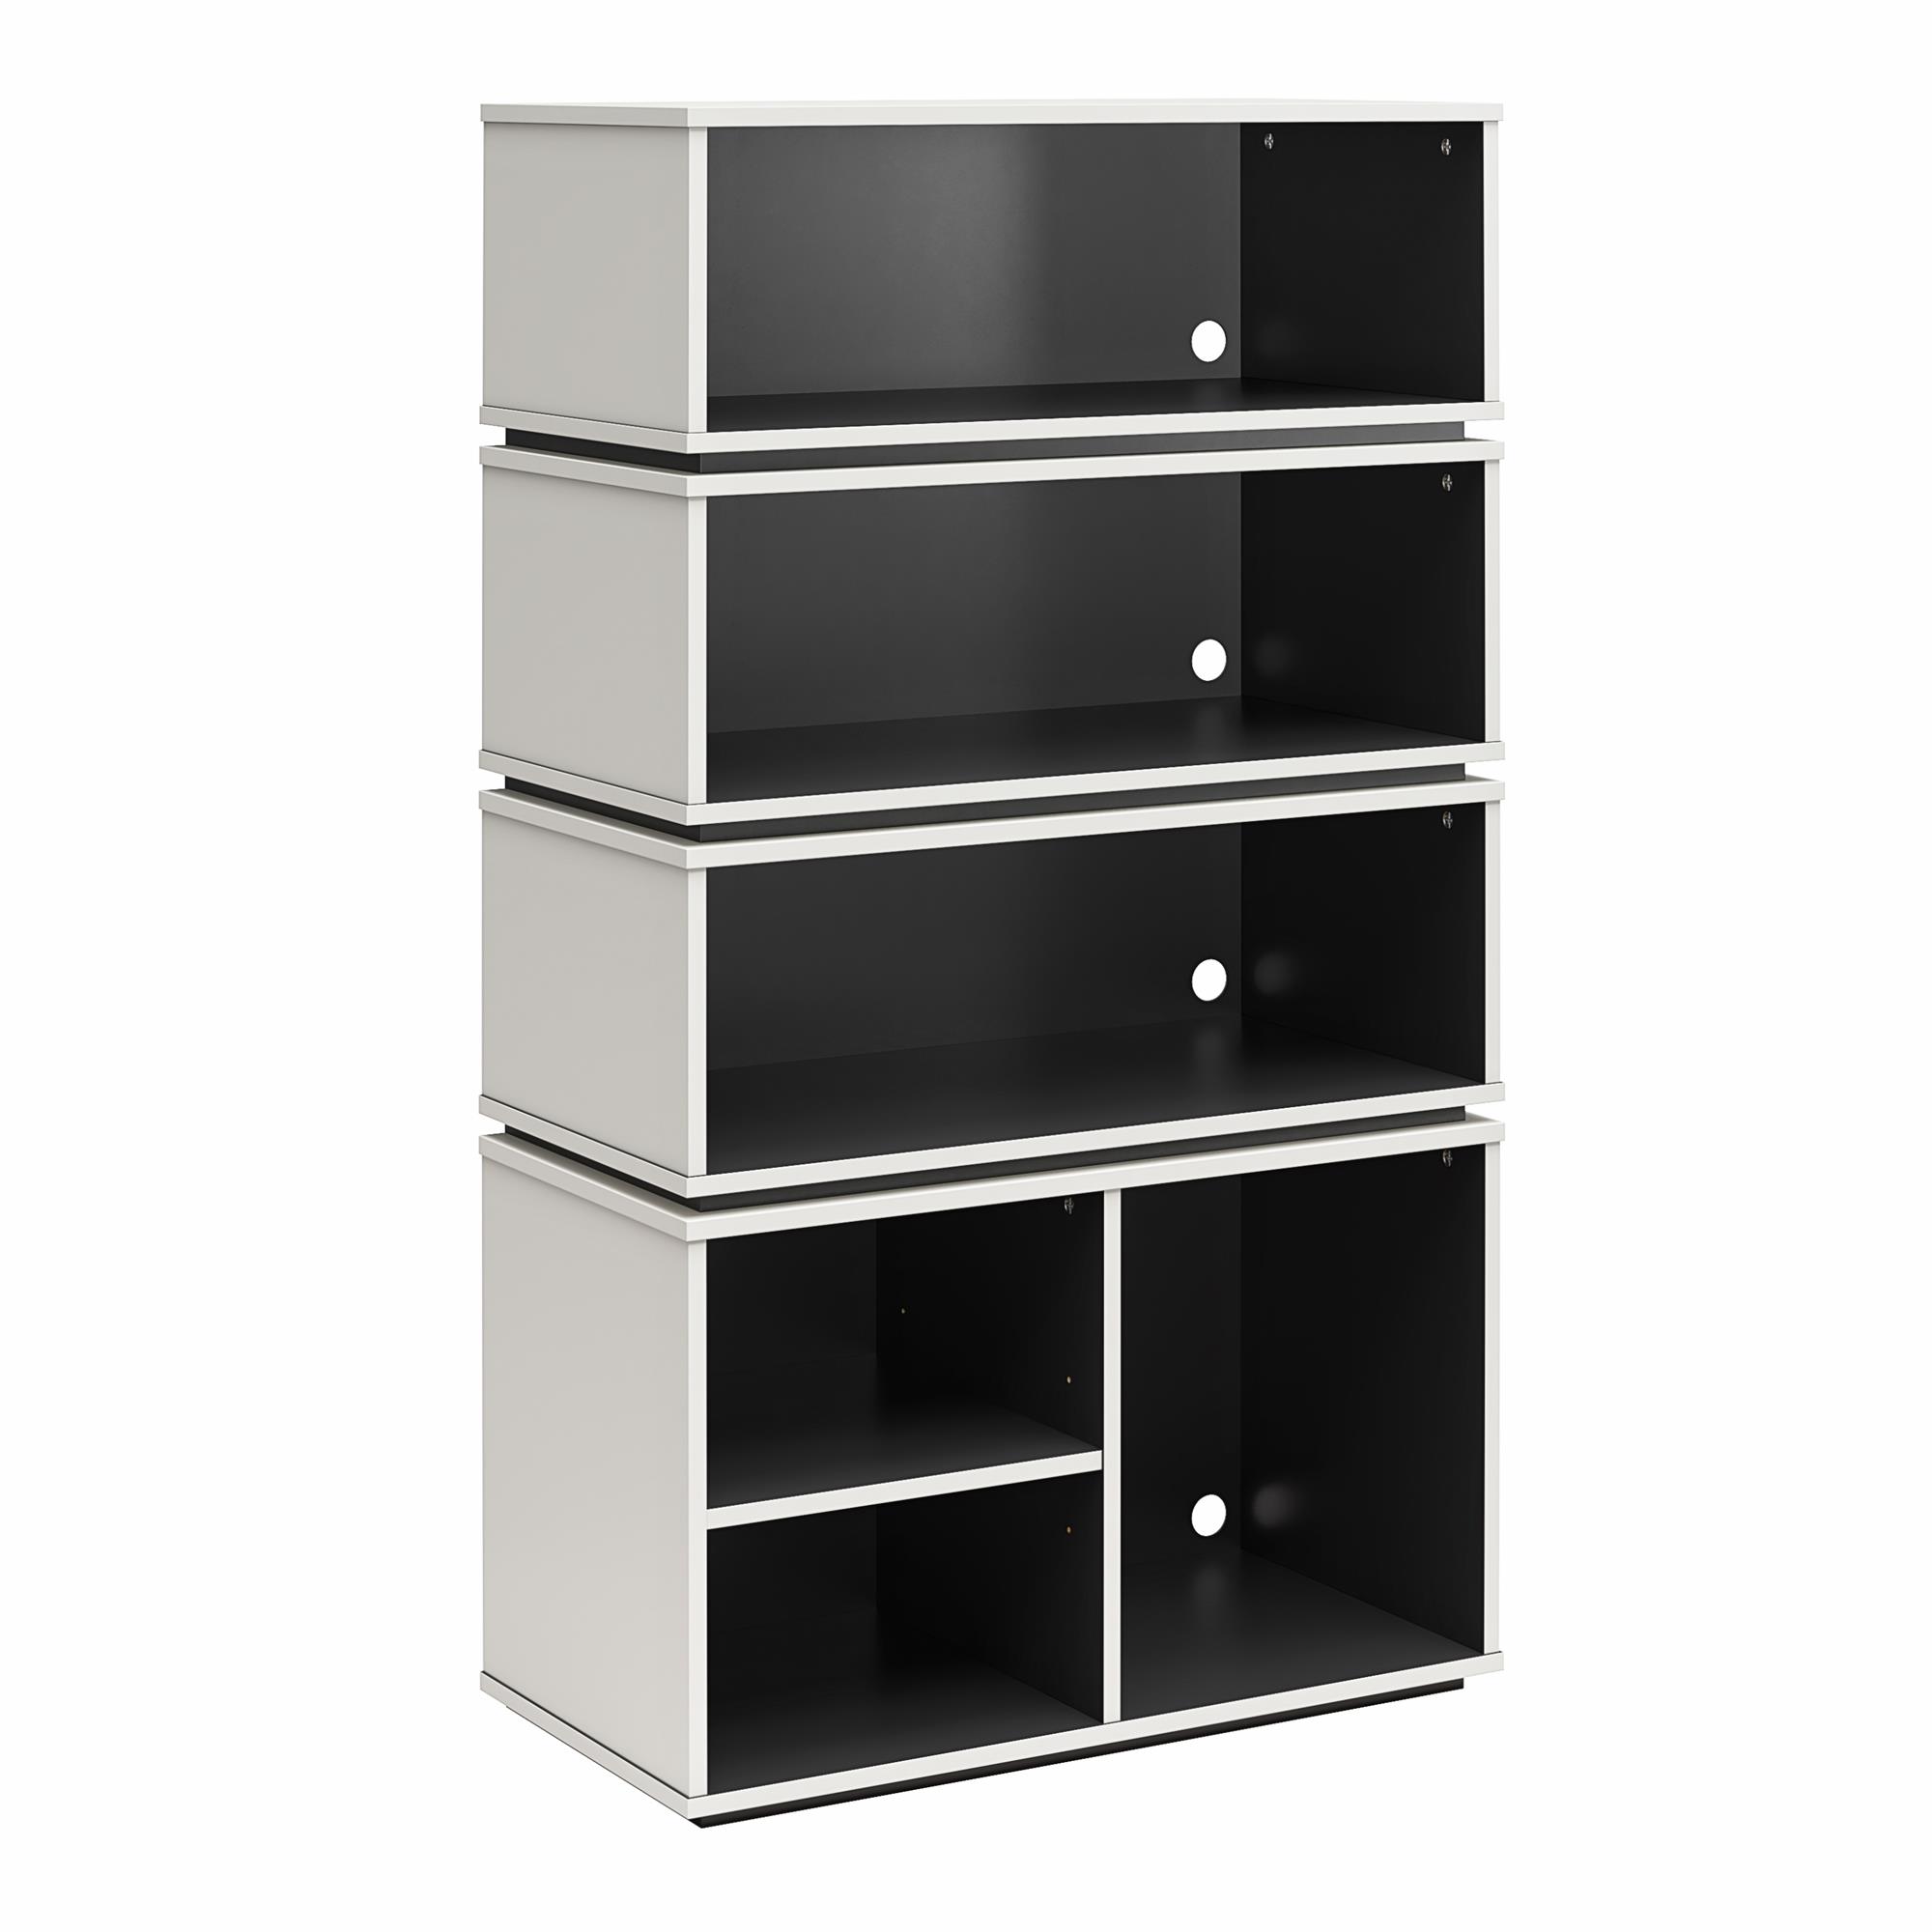 NTense Eclipse Gaming & Collectable Display Storage Bookcase, White and Charcoal - image 4 of 15